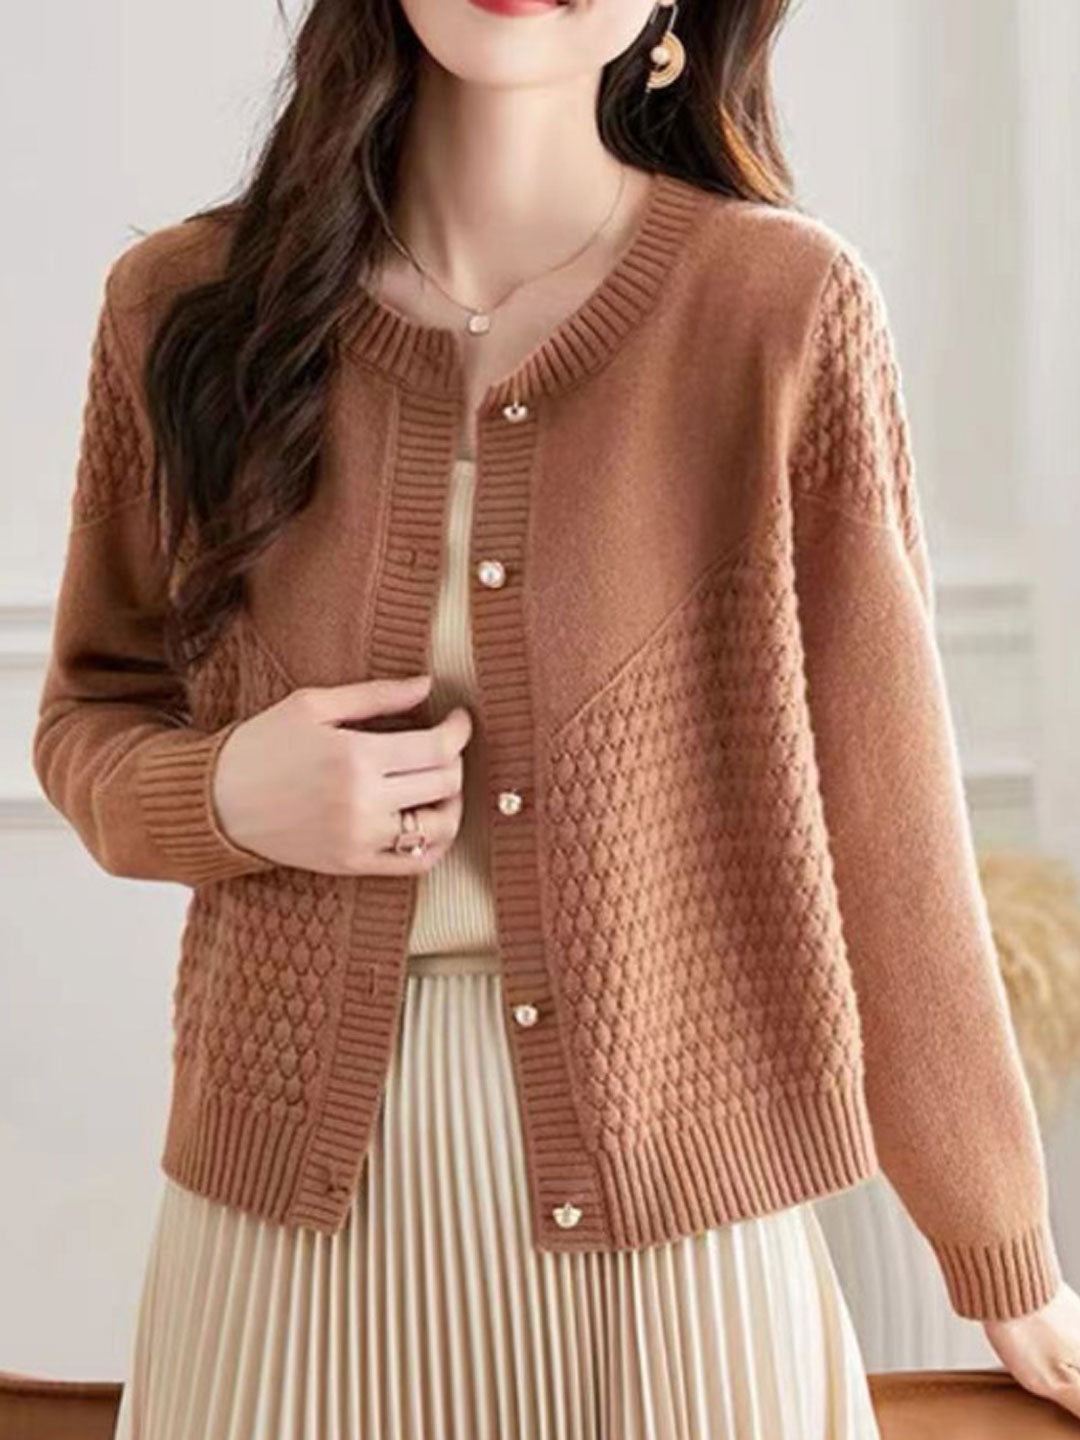 Sophia Loose Crew Neck Knitted Sweater Cardigan-Camel